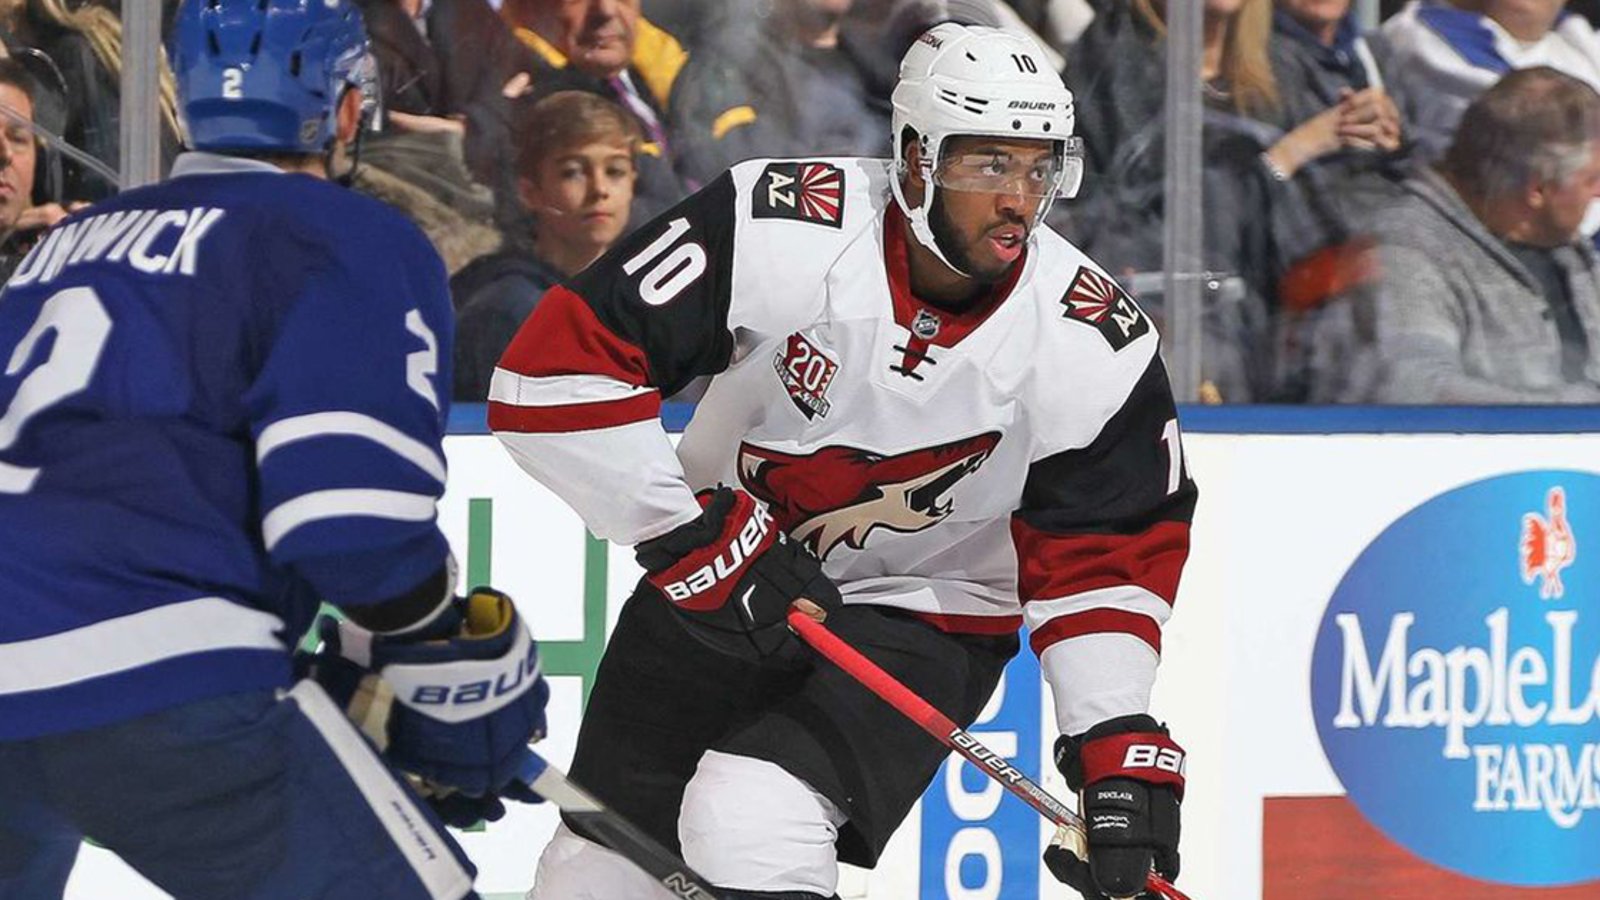 Your Call: Should the Leafs trade for Duclair?